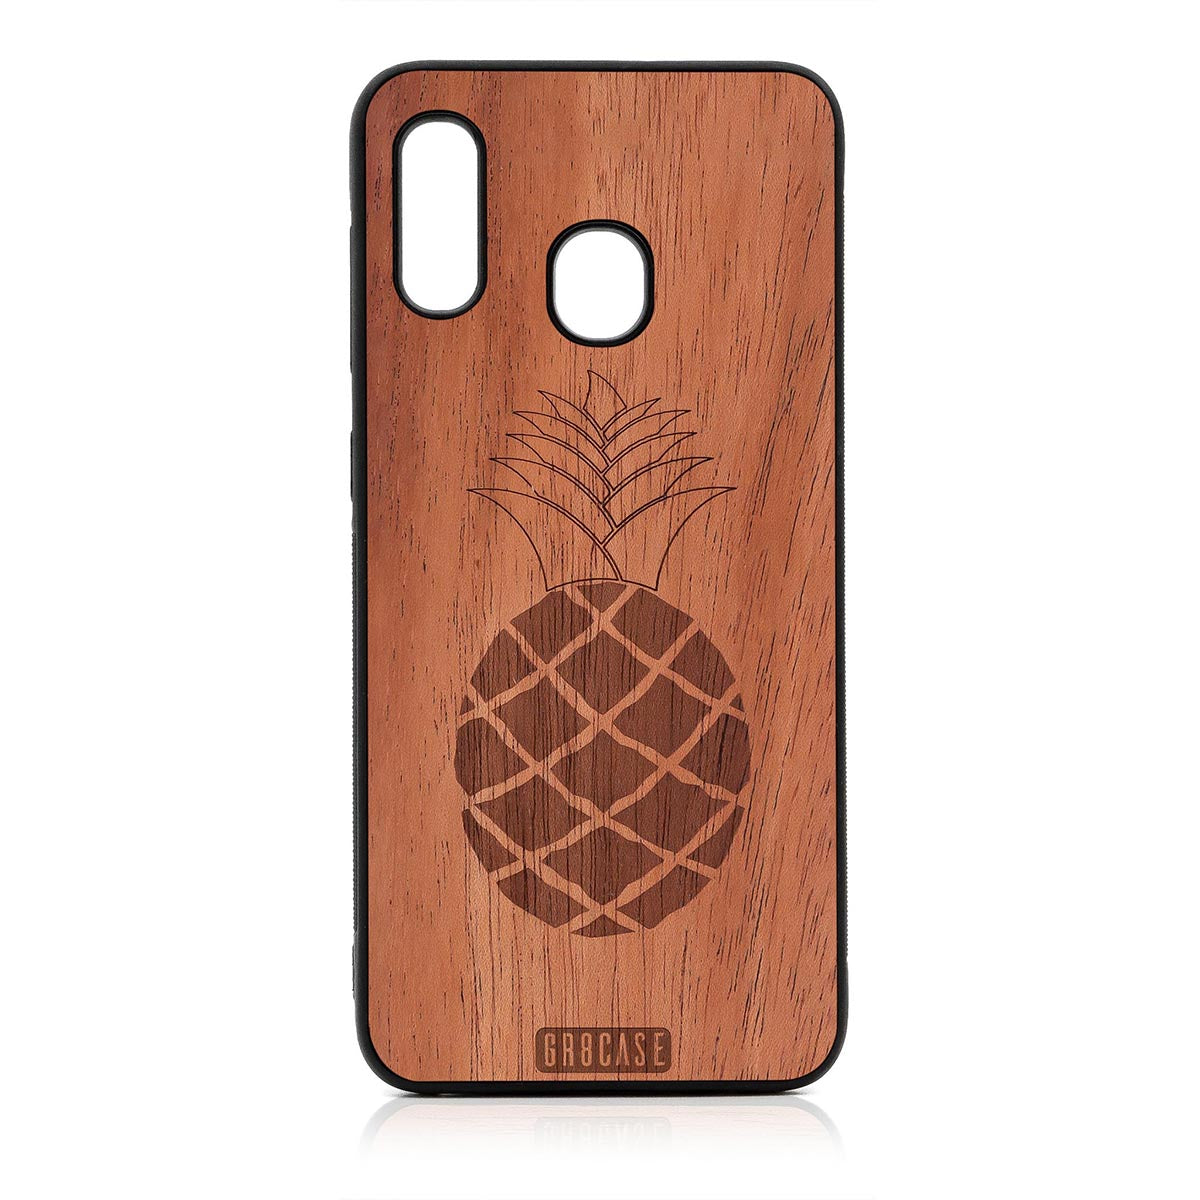 Pineapple Design Wood Case For Samsung Galaxy A20 by GR8CASE